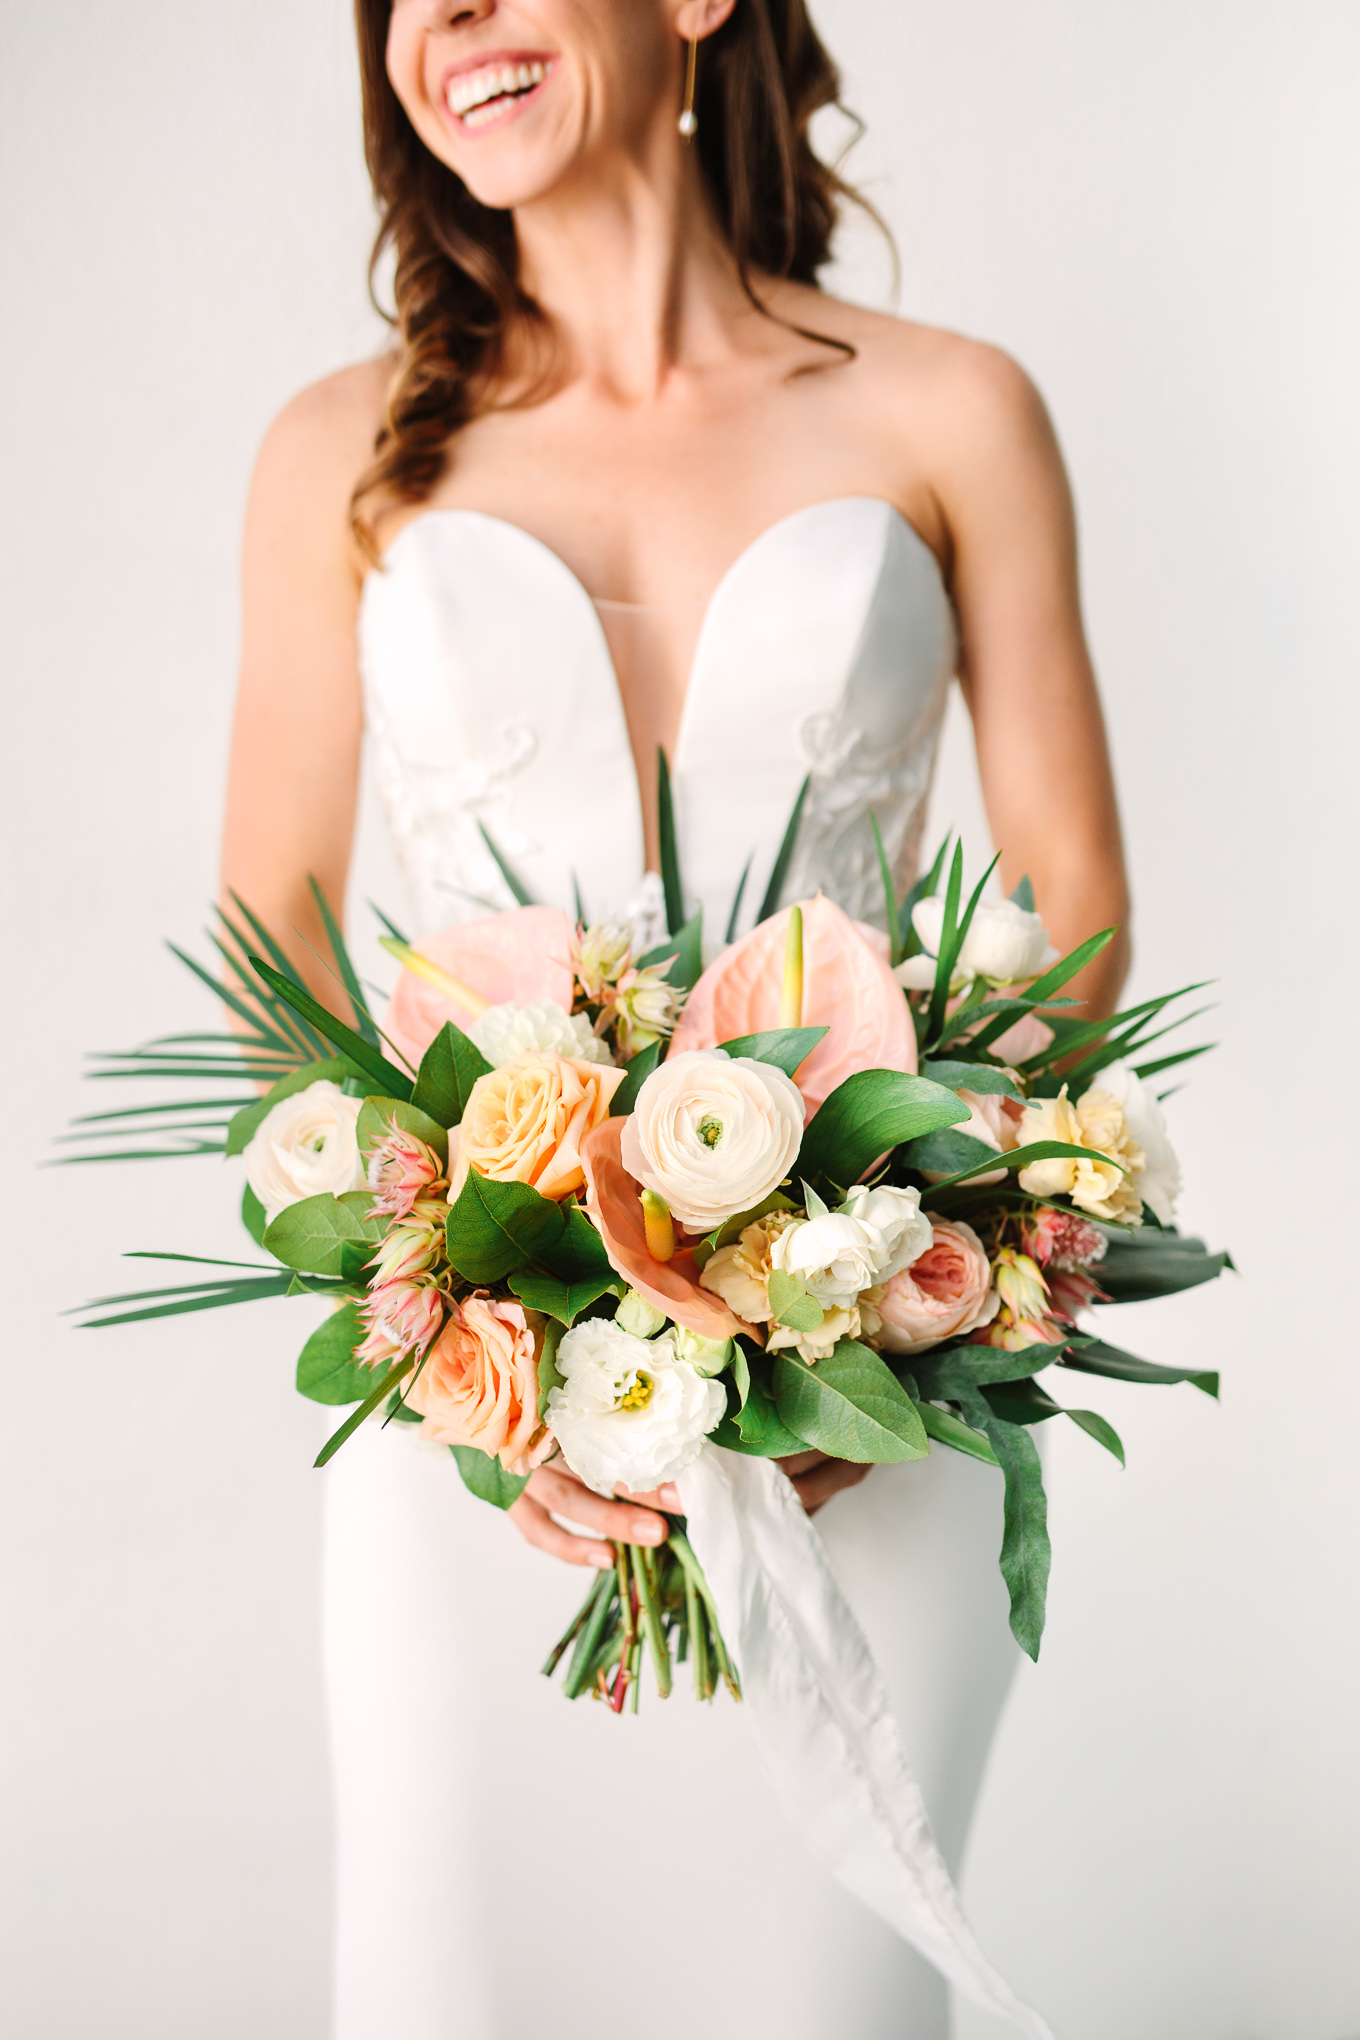 Bride with neutral and peach tropical bouquet | Beautiful bridal bouquet inspiration and advice | Colorful and elevated wedding photography for fun-loving couples in Southern California | #weddingflowers #weddingbouquet #bridebouquet #bouquetideas #uniquebouquet   Source: Mary Costa Photography | Los Angeles